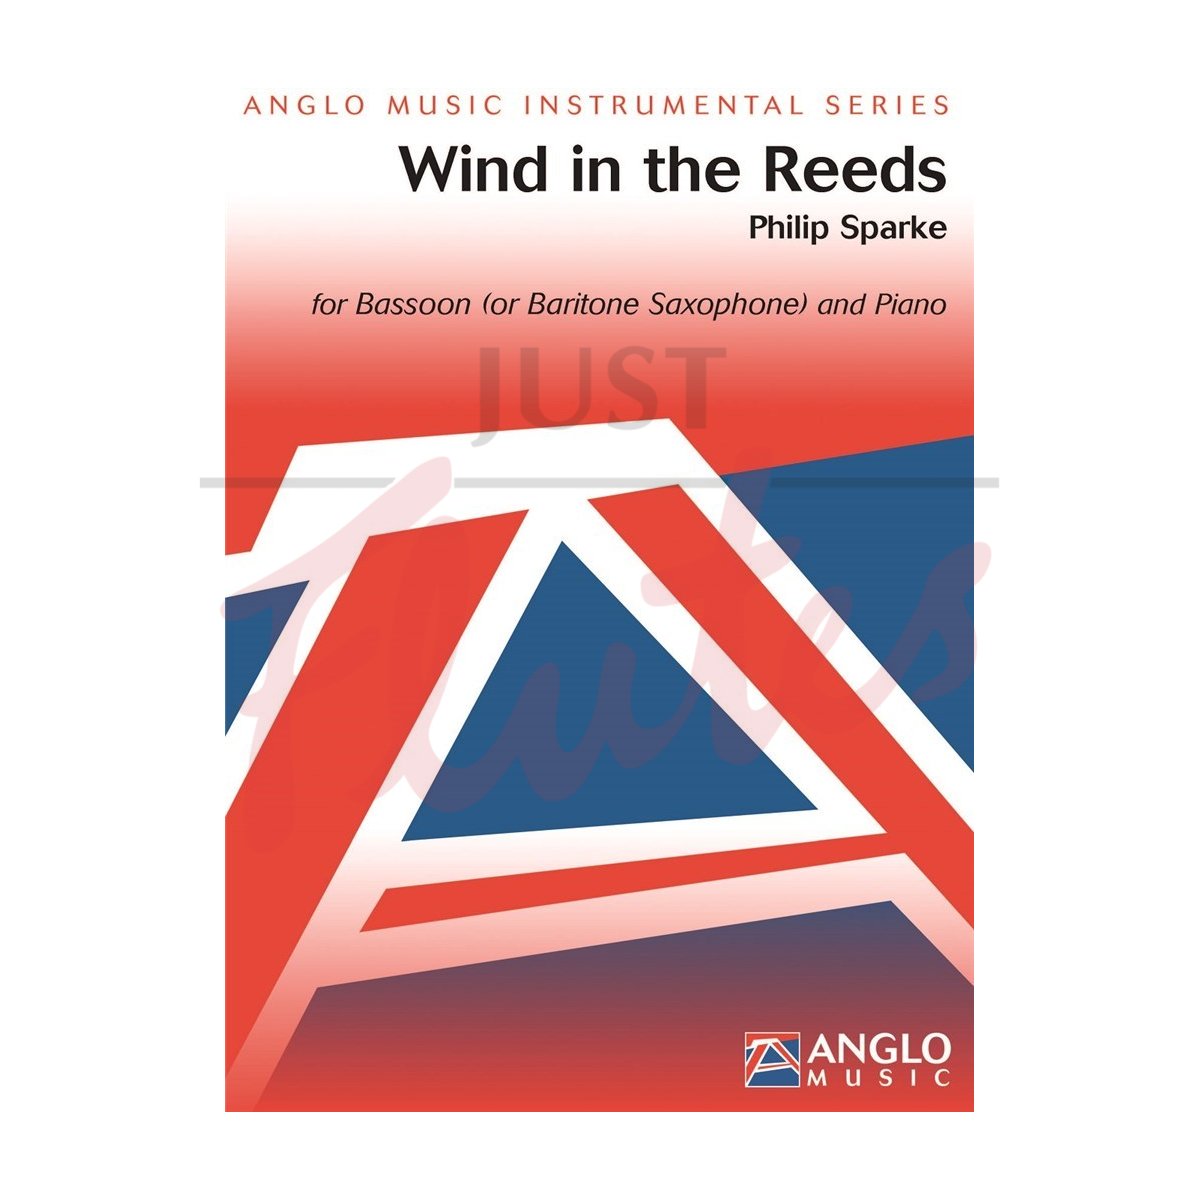 Wind in the Reeds for Bassoon/Baritone Saxophone and Piano